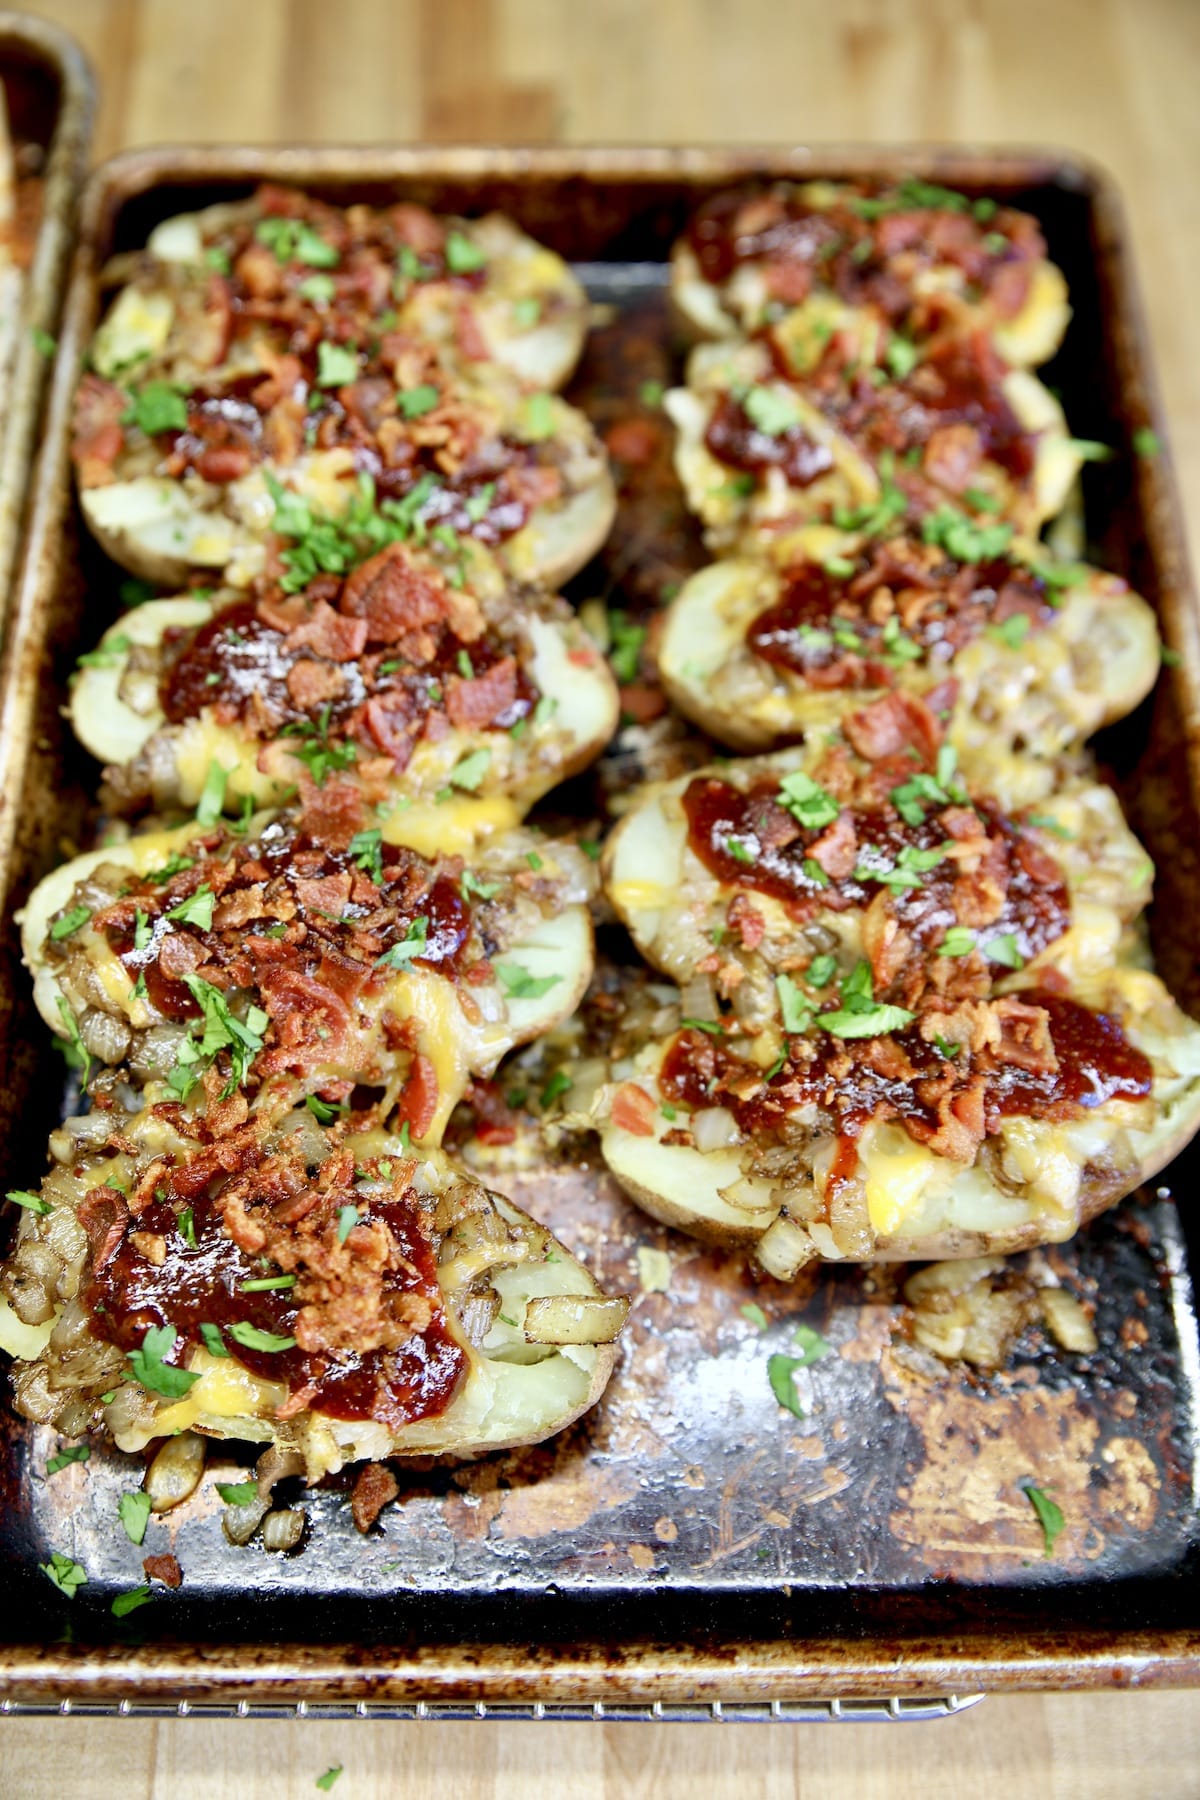 Sheet pan of baked potatoes topped with bacon, cheese, bbq sauce.